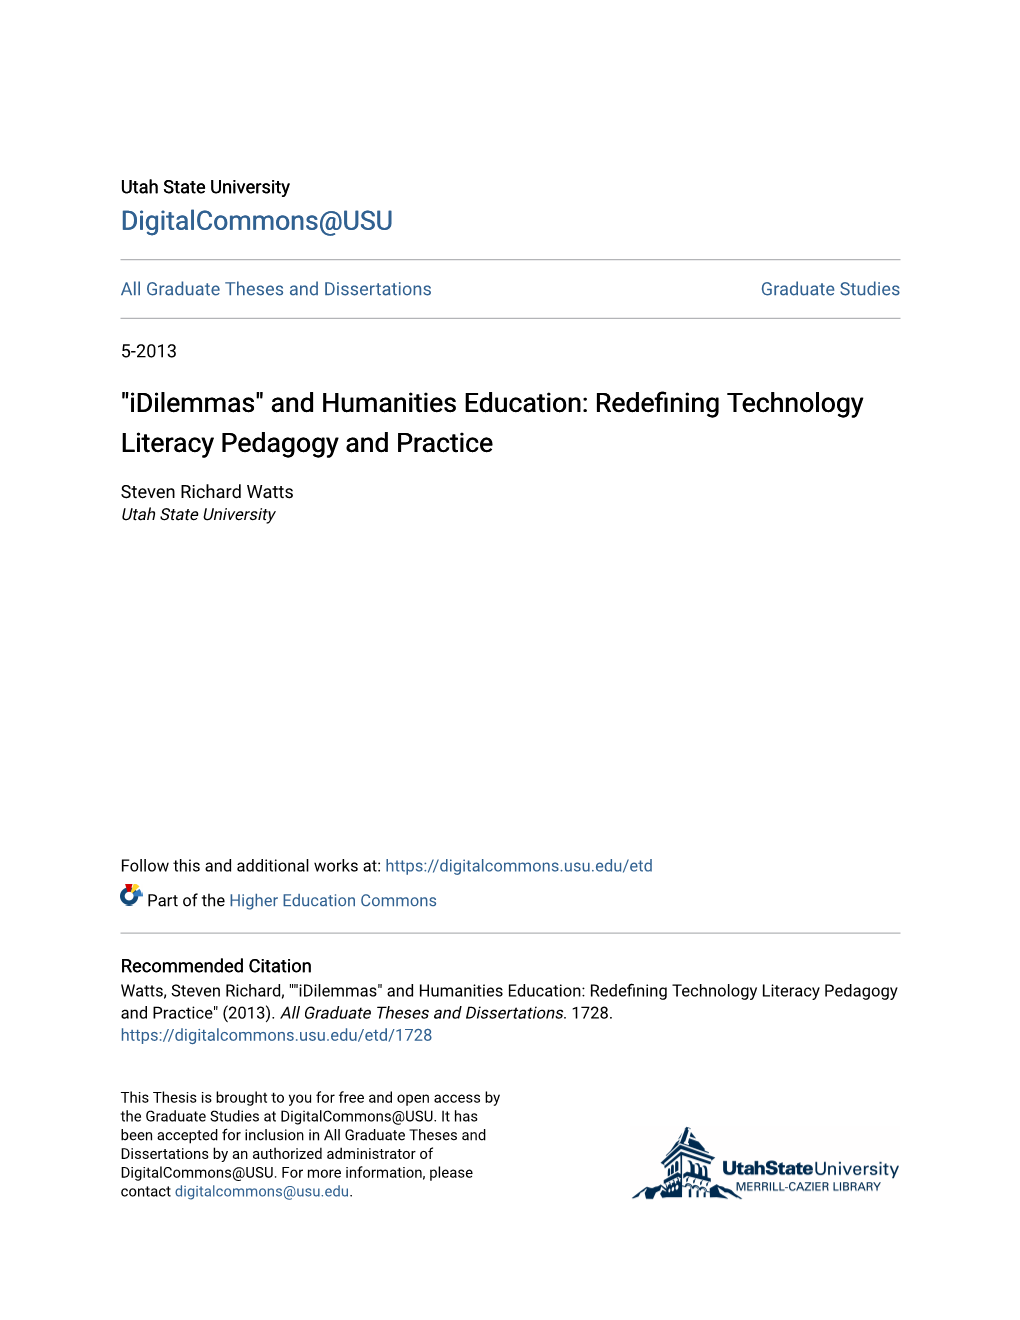 Redefining Technology Literacy Pedagogy and Practice